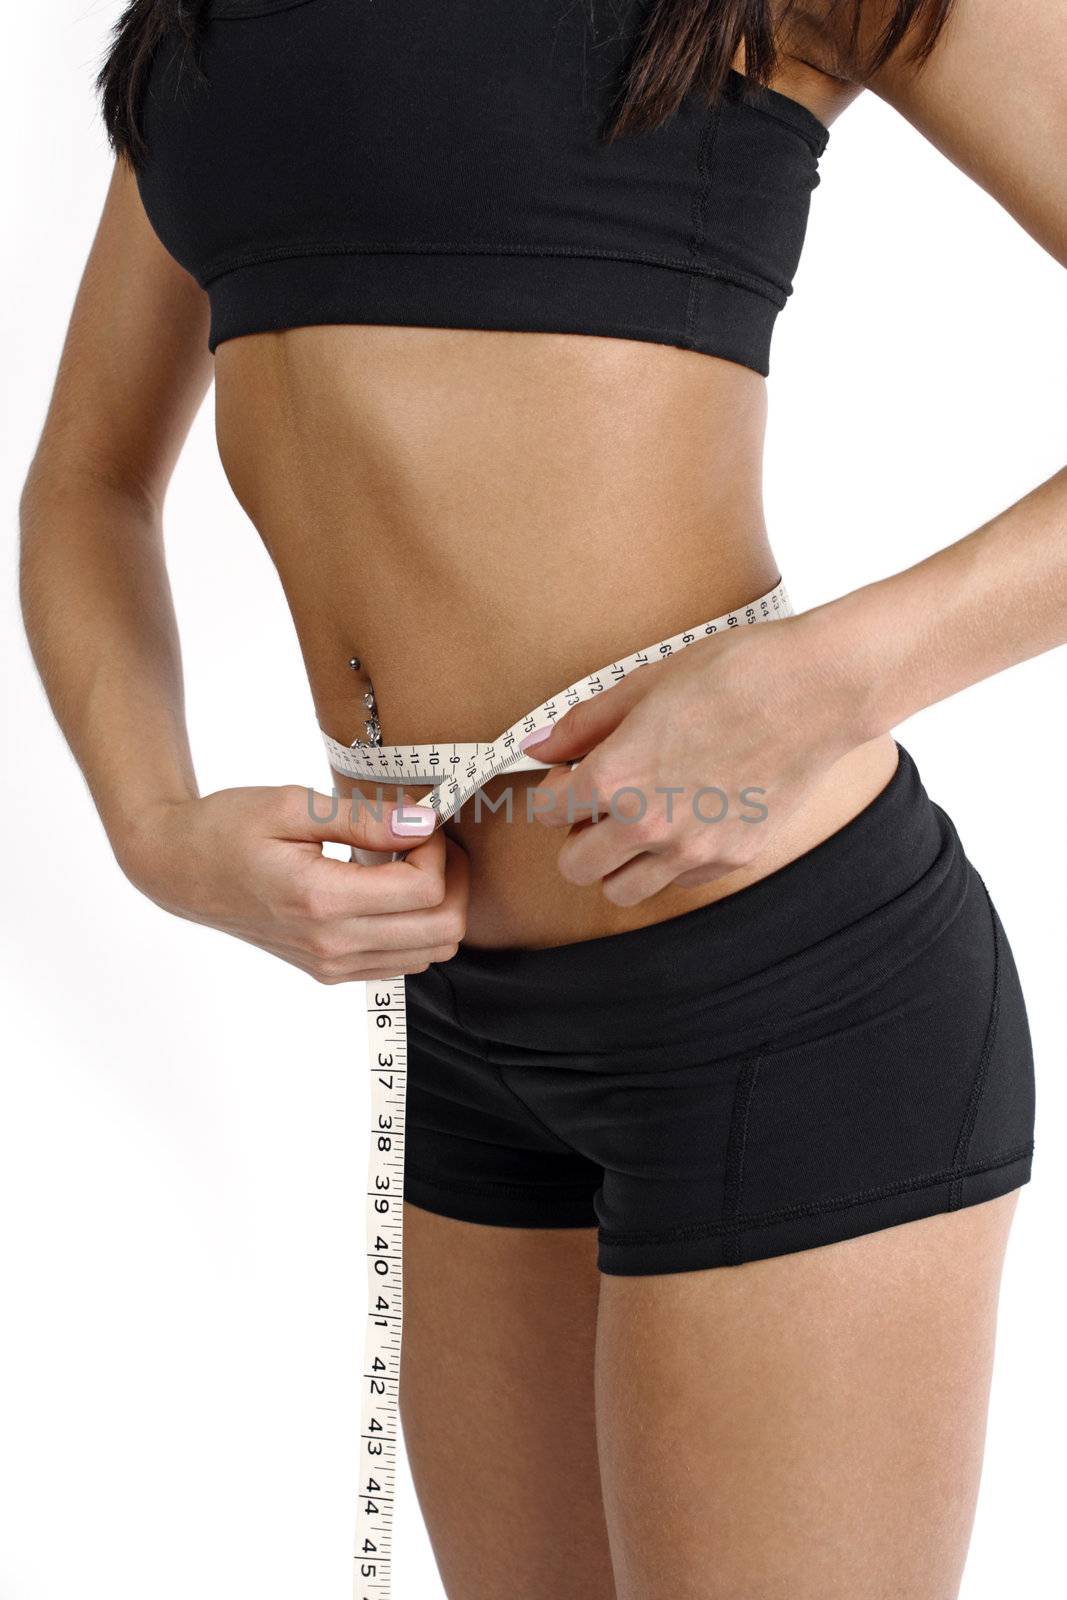 A tanned slim young woman measuring her waistline.
